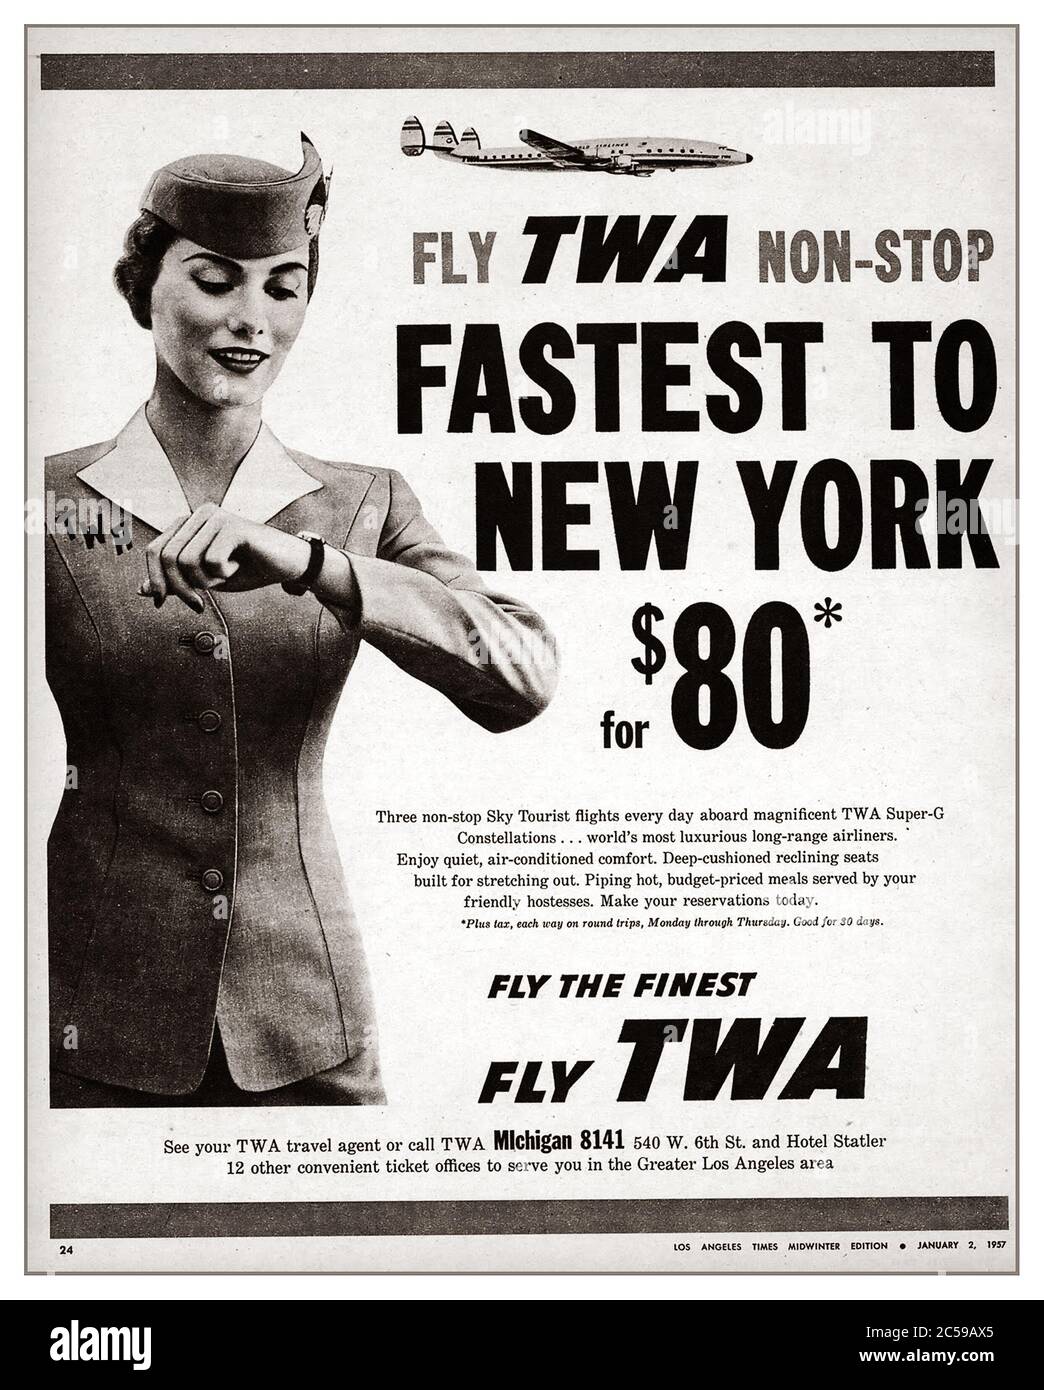 1950's TWA Aviation Flying press advertisement 'Fly TWA non-stop Fastest to New York $80  L.A. Times Midwinter Magazine - January 2, 1957 Stock Photo